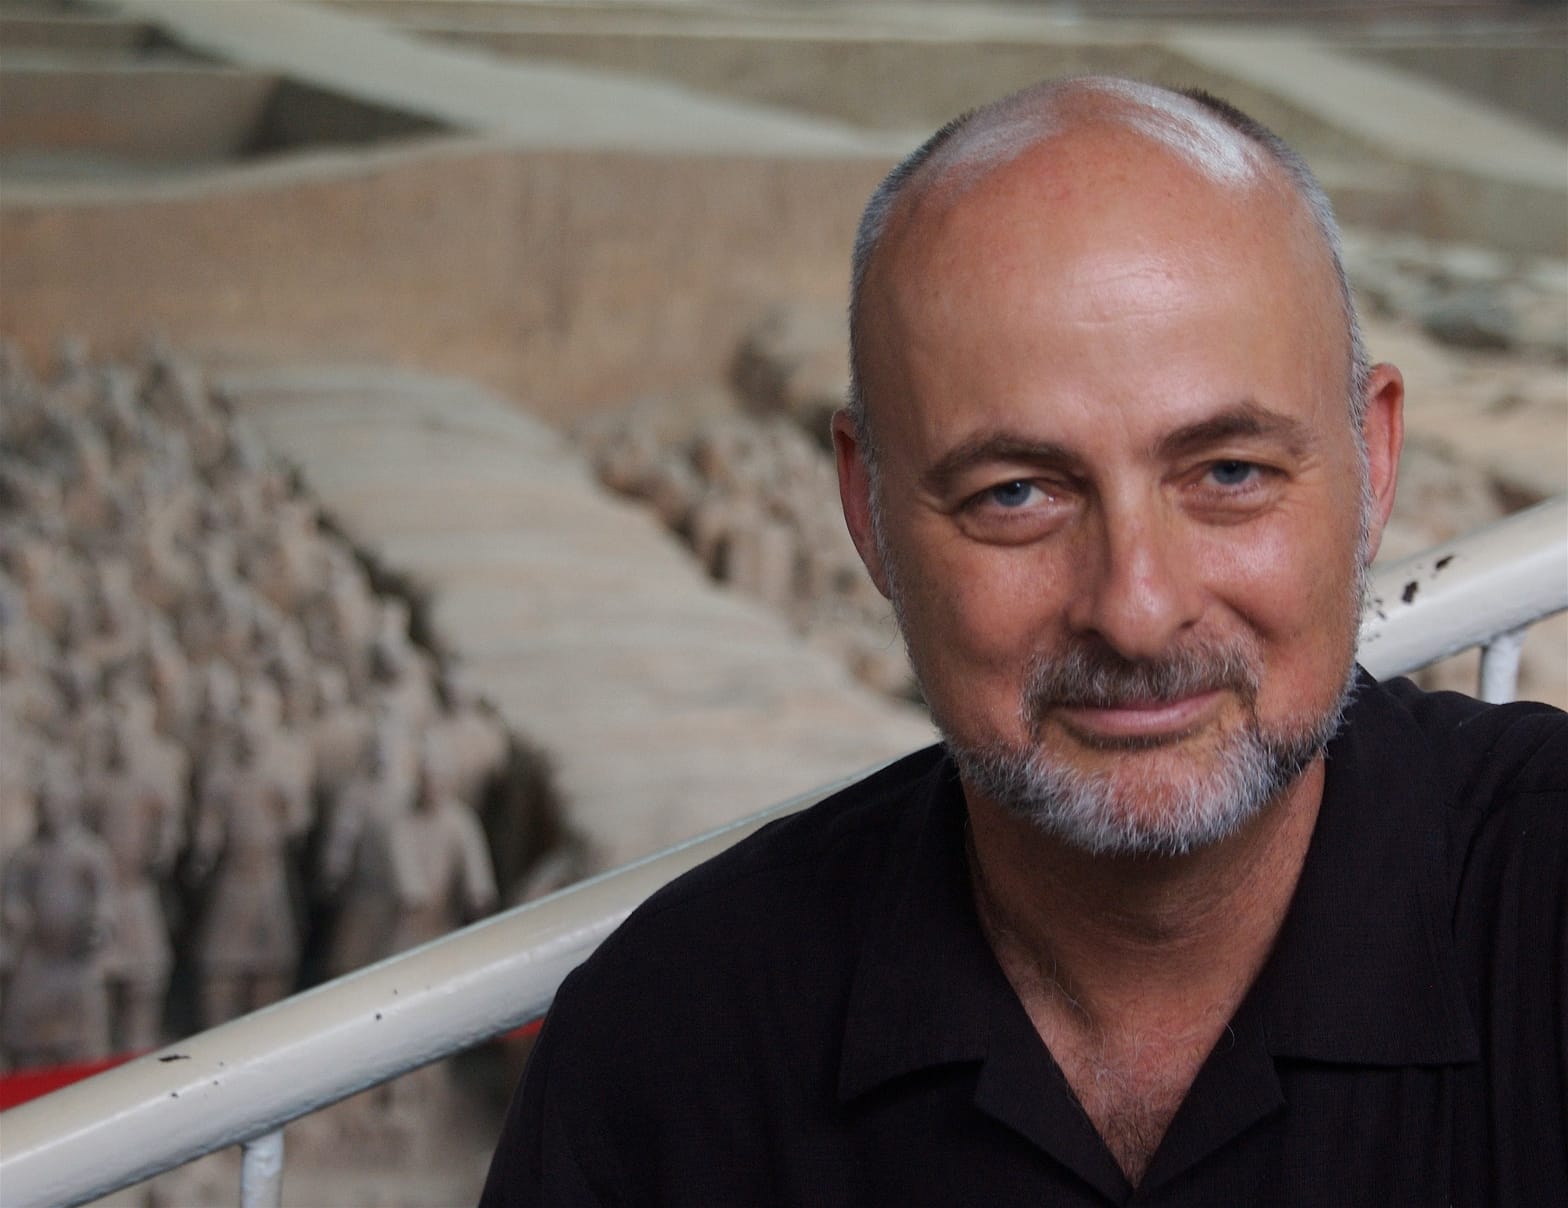 A conversation with best selling science fiction author David Brin